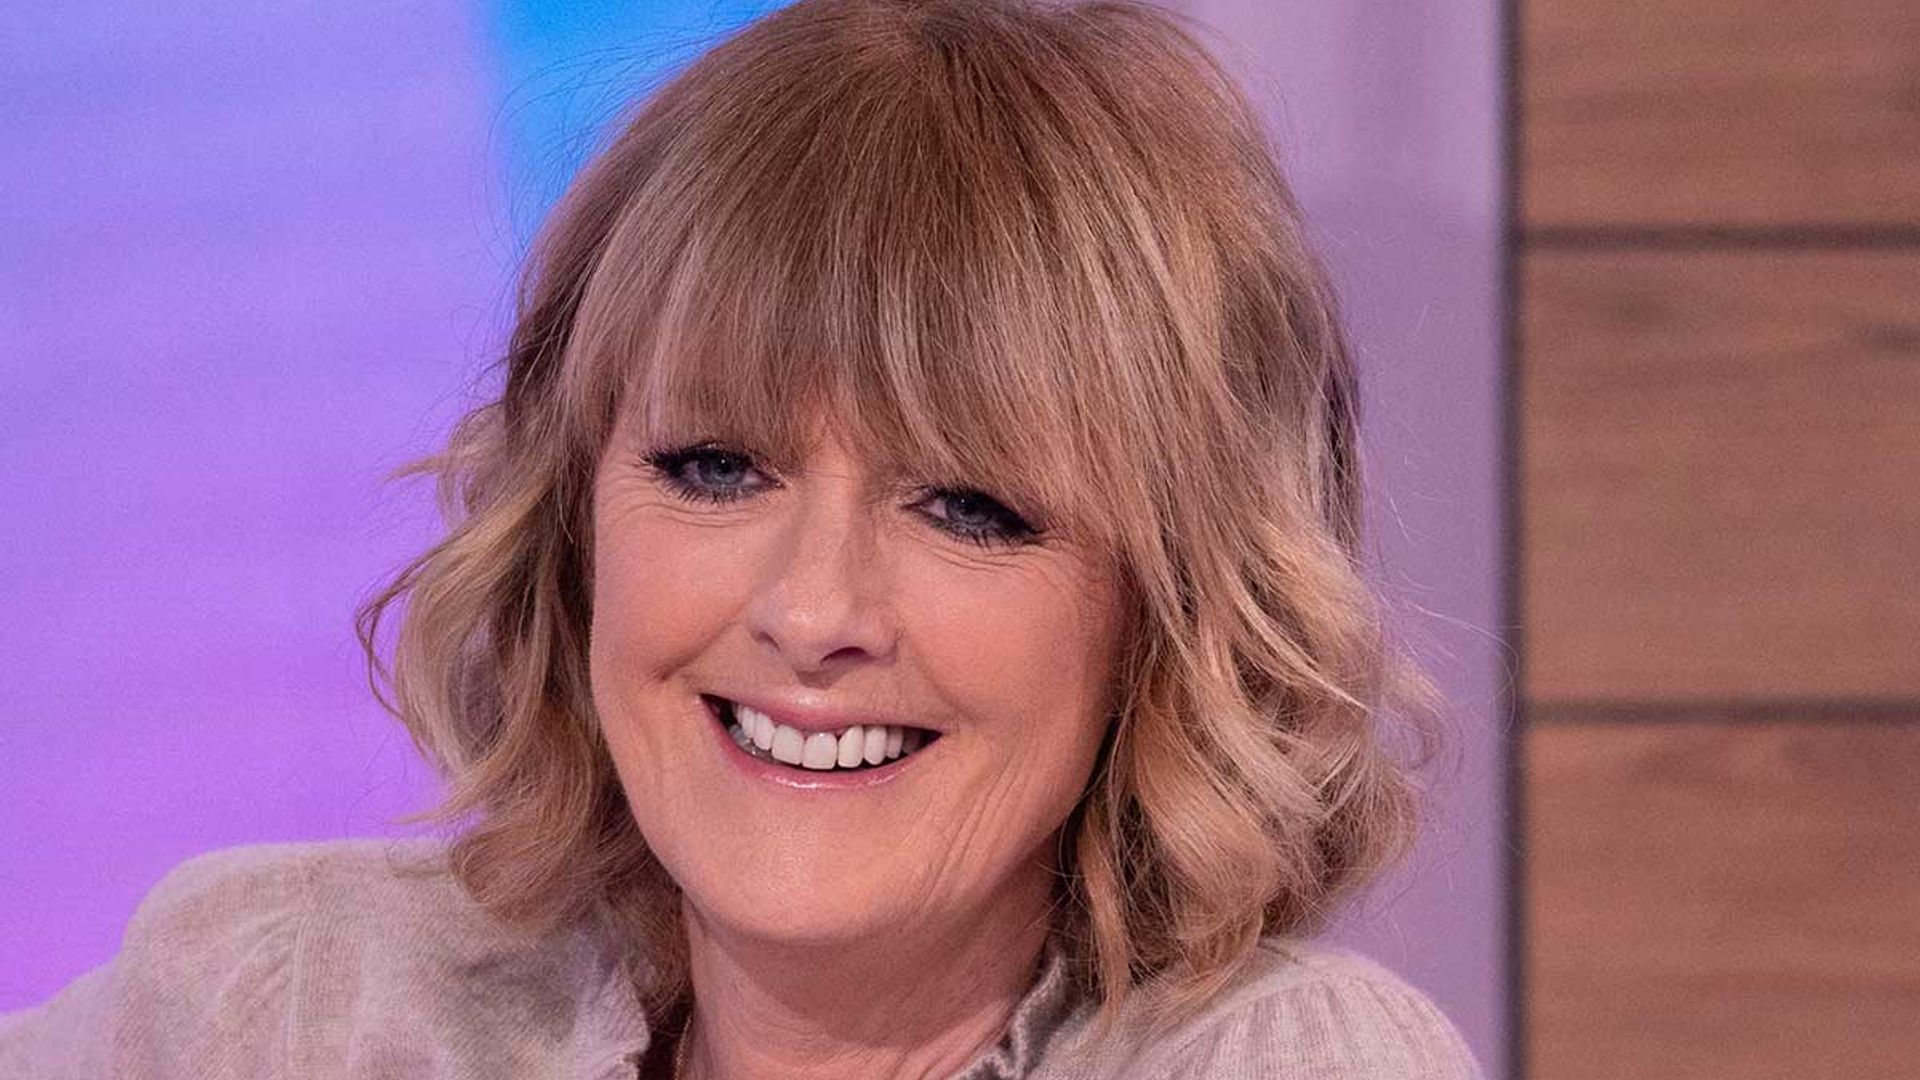 Jane Moore's incredible hair transformation wows fans